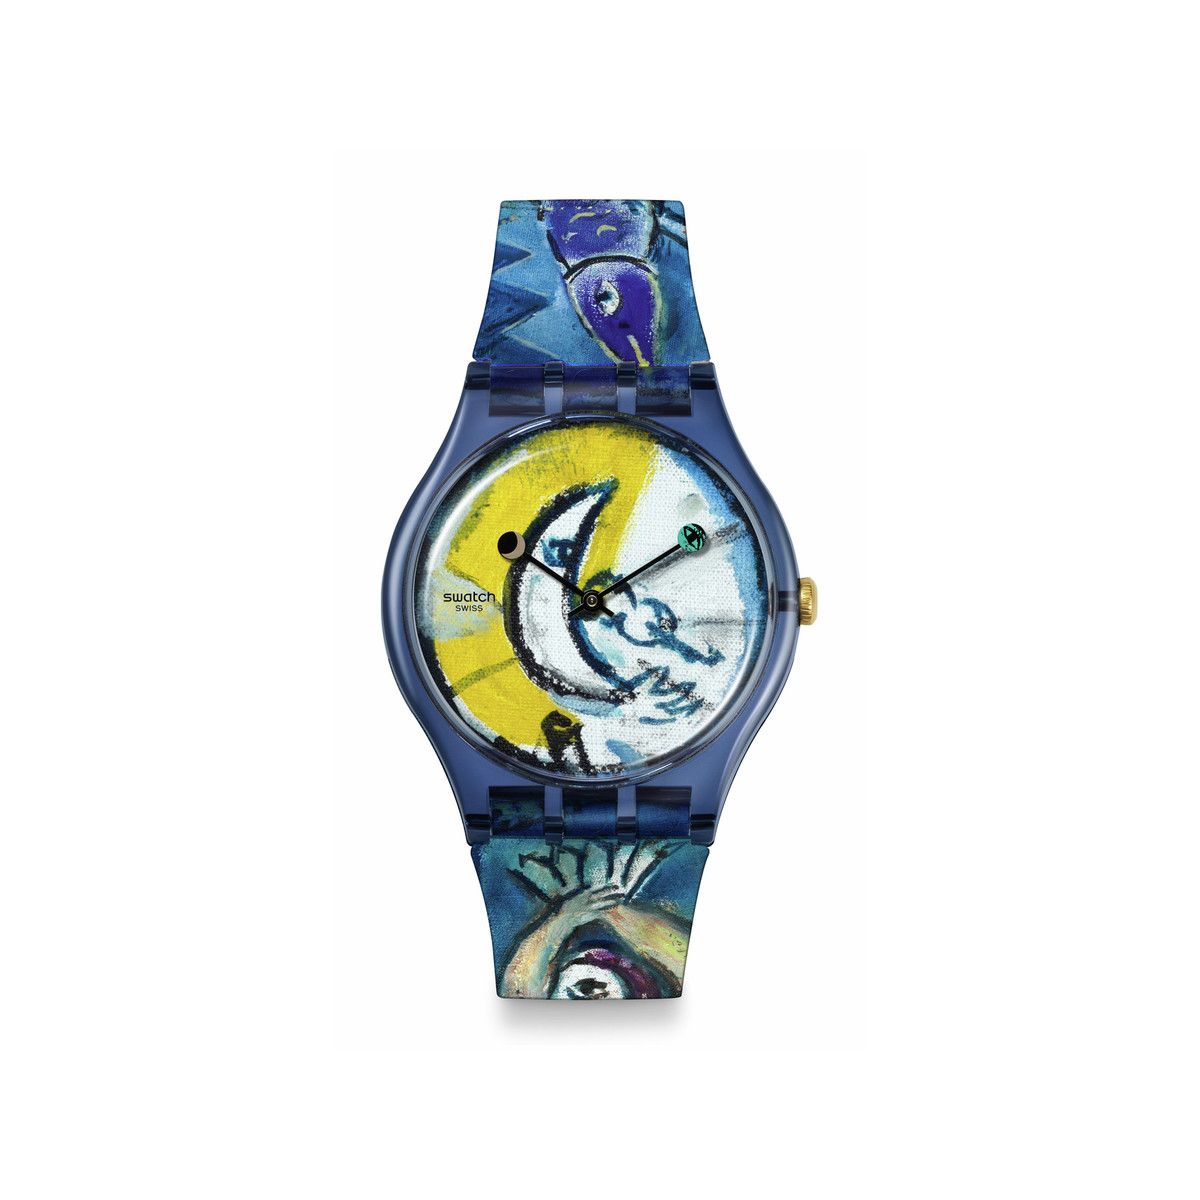 Montre SWATCH New gent bioceramic Chagall's blue circus homme bracelet silicone bleu